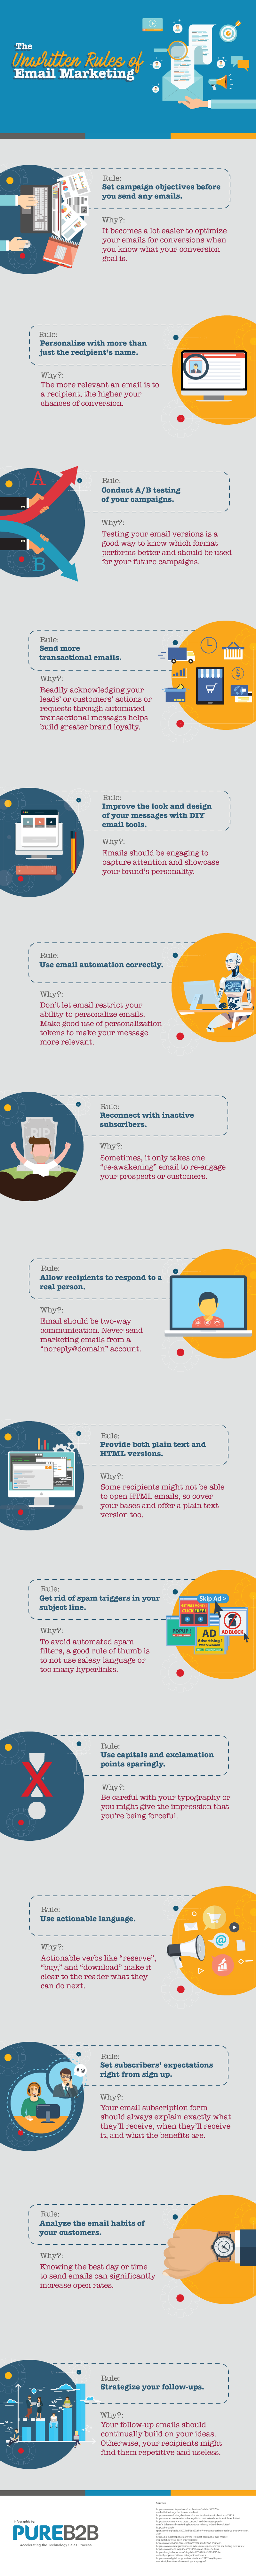 The Unwritten Rules of Email Marketing (Infographic)